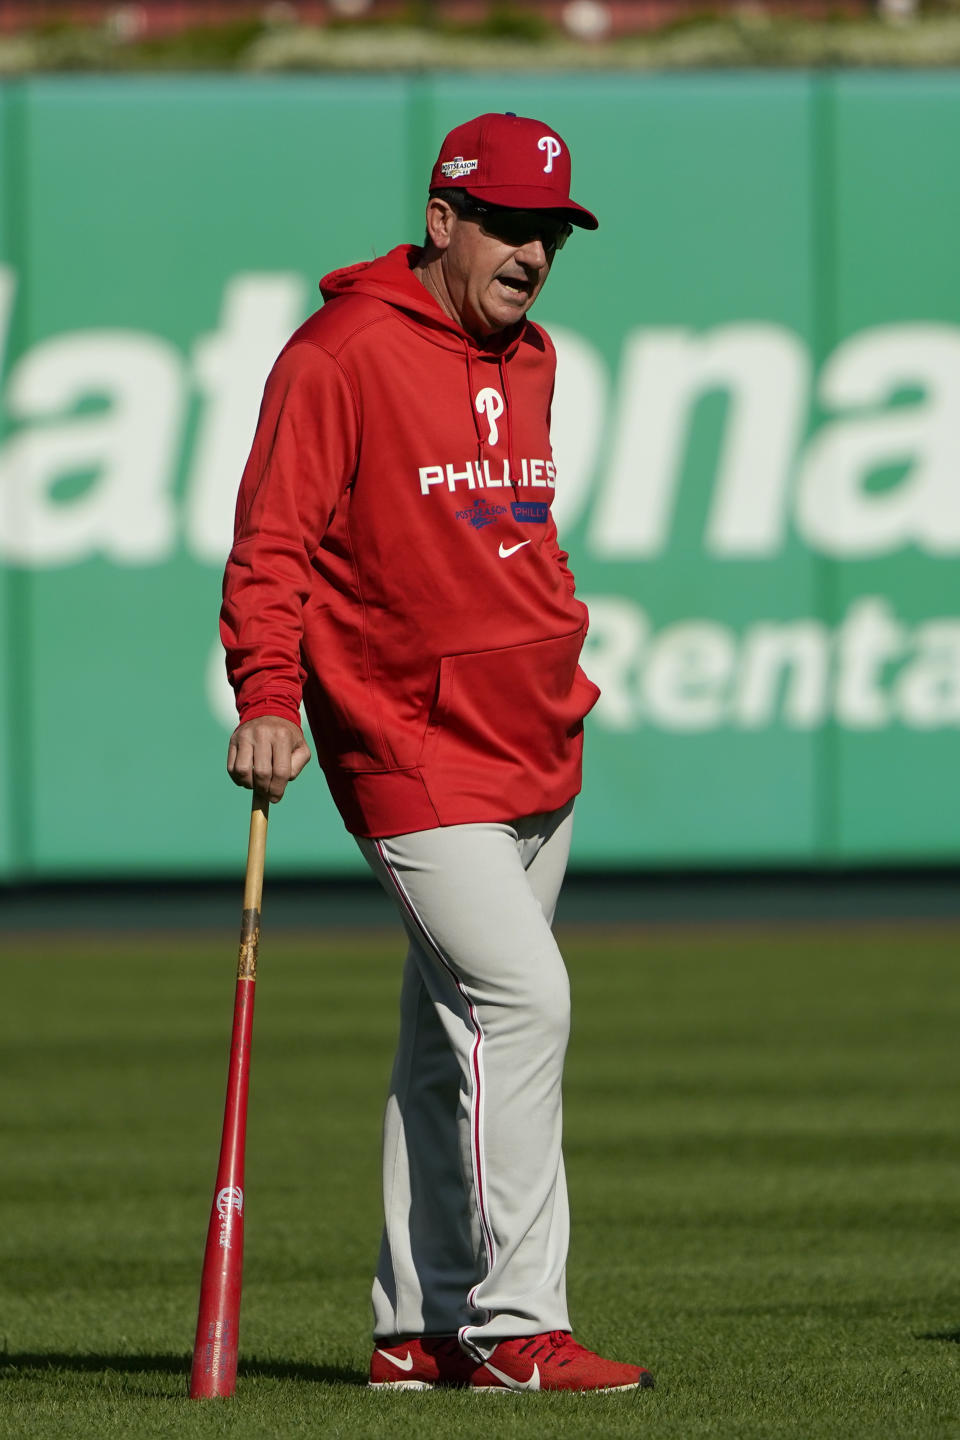 Philadelphia Phillies interim manager Rob Thomson watches during baseball practice Thursday, Oct. 6, 2022, in St. Louis. The Phillies and St. Louis Cardinals are set to play Game 1 of a National League Wild Card baseball playoff series on Friday in St. Louis. (AP Photo/Jeff Roberson)